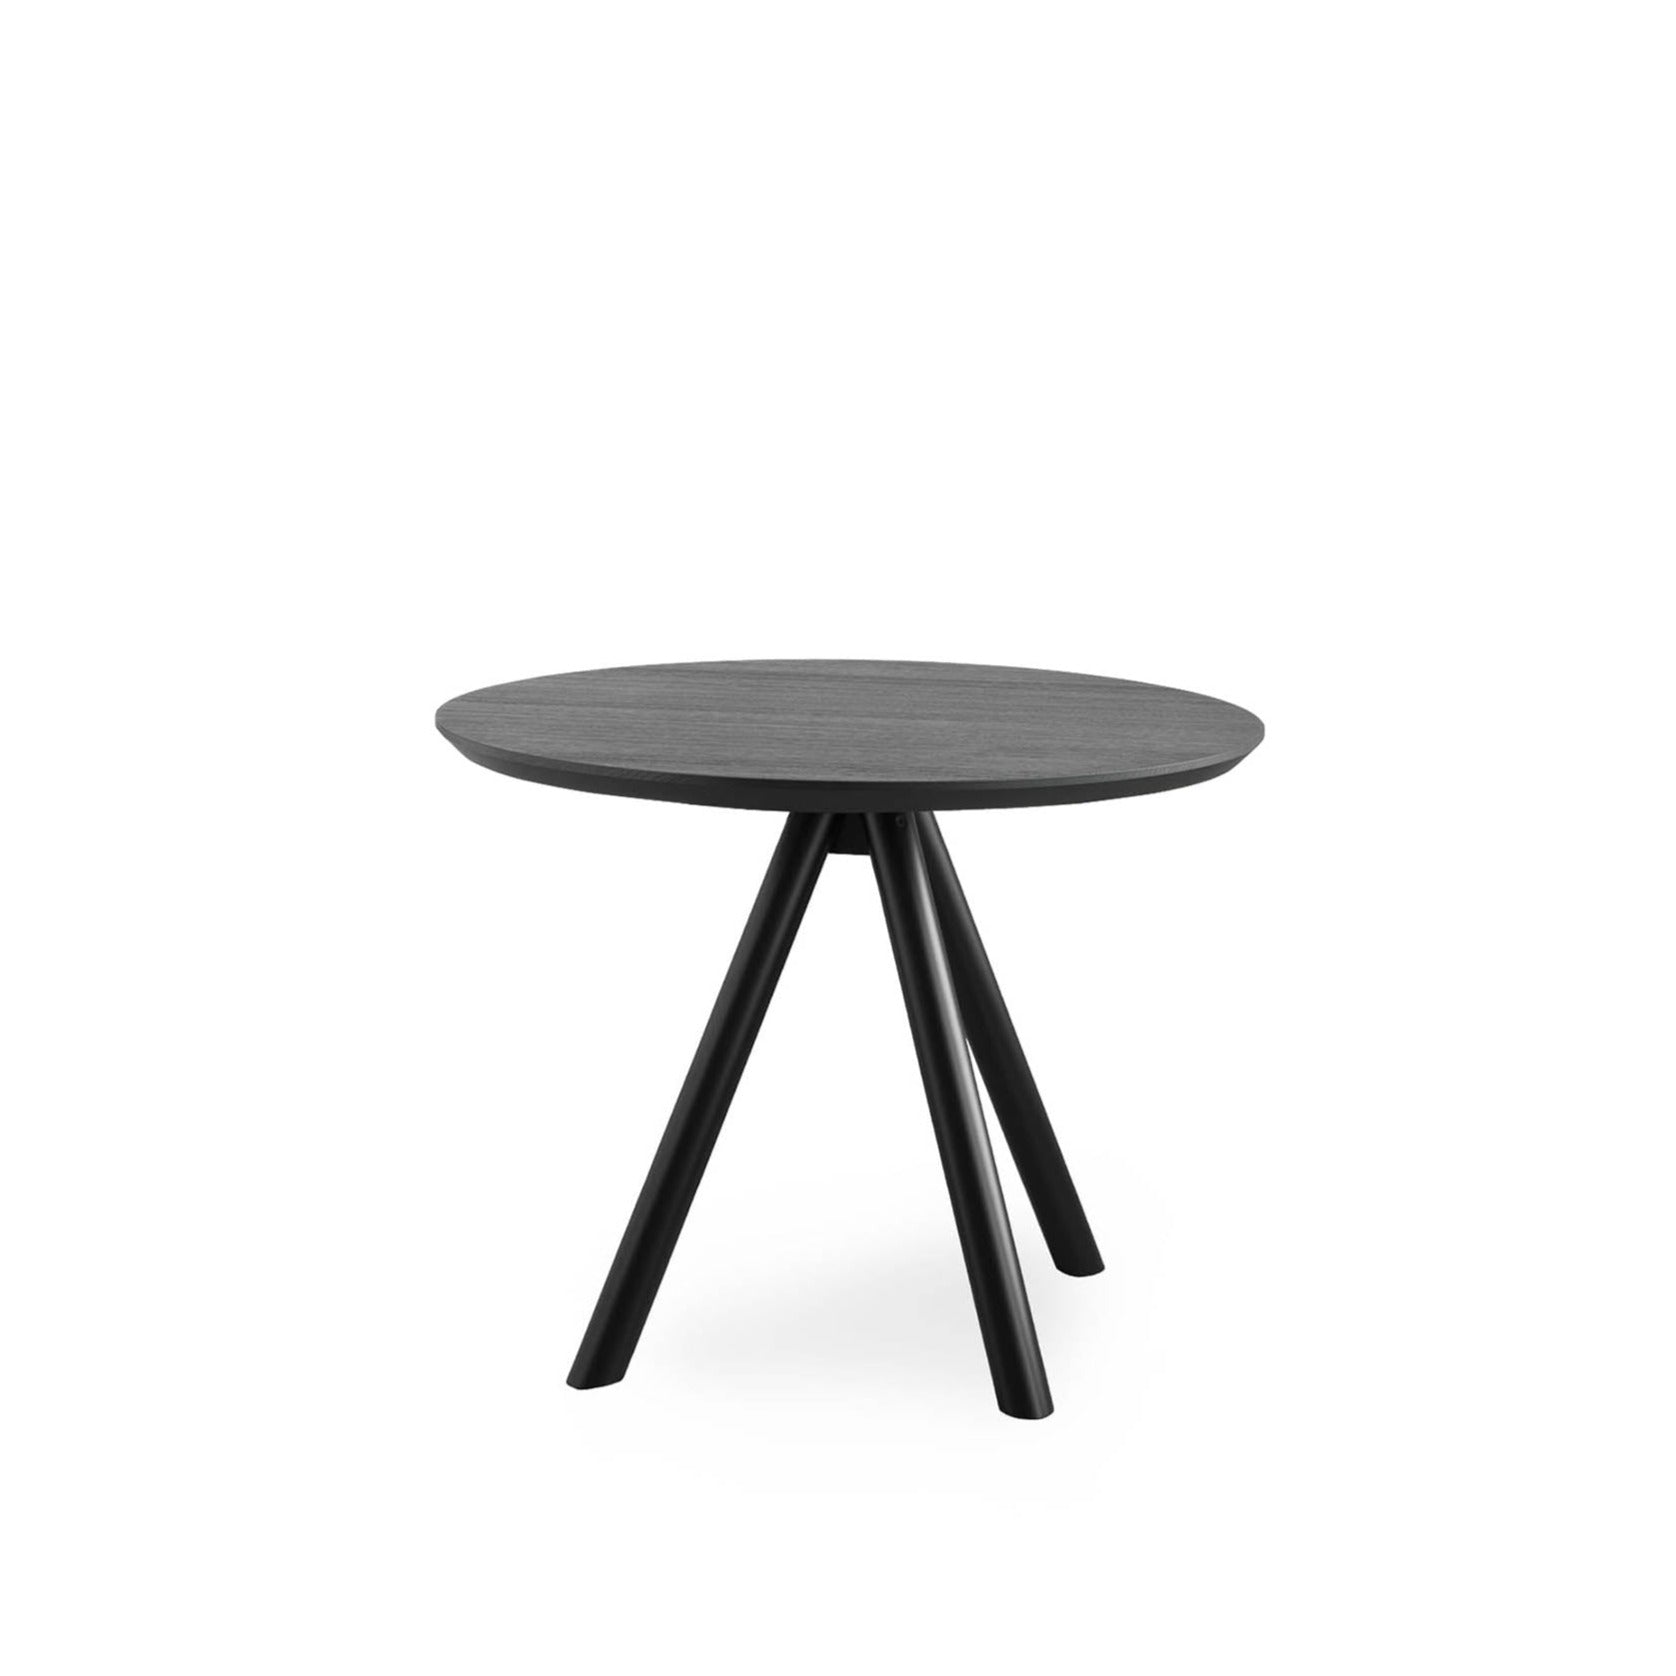 AKY CONTRACT 3 WOOD Table side view beech black